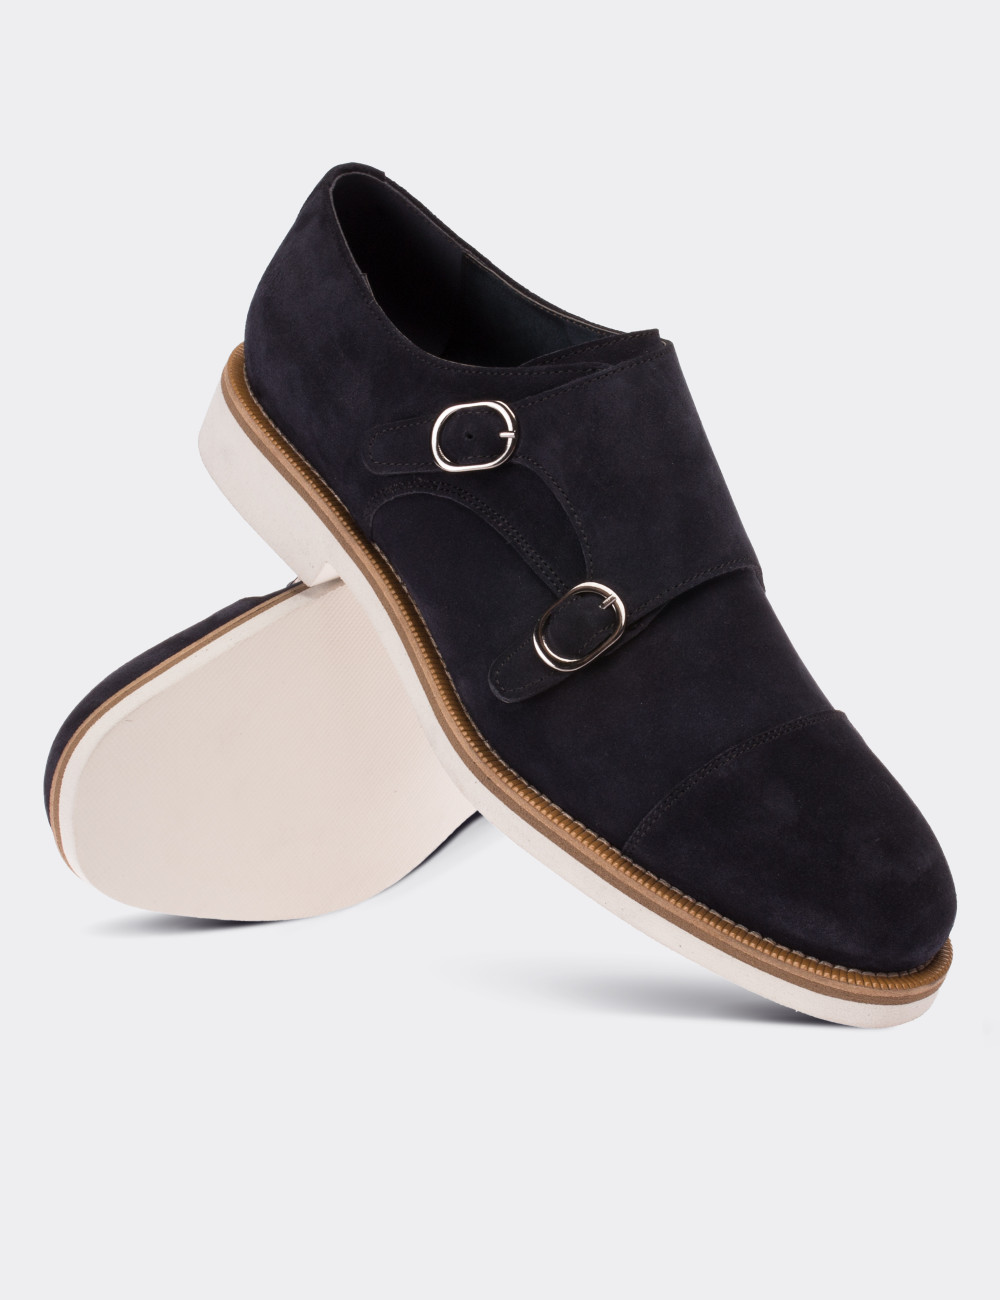 Navy Suede Leather Monk Straps Shoes - 01566MLCVE02